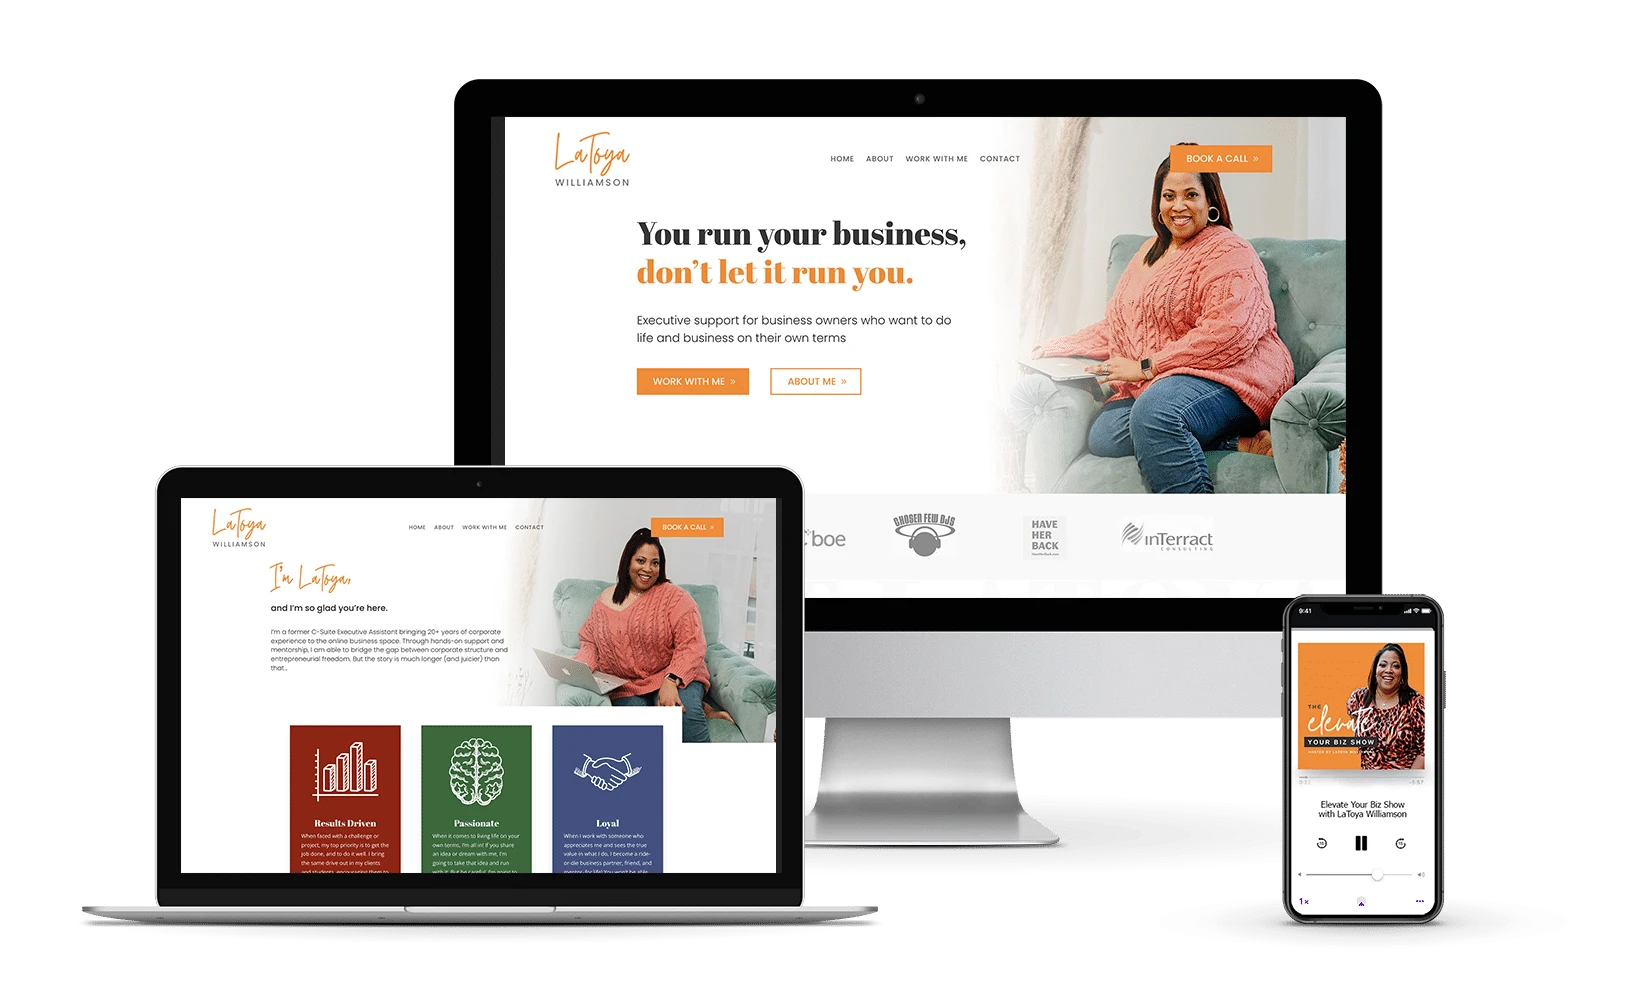 website design for online business coaches - vip website in a day